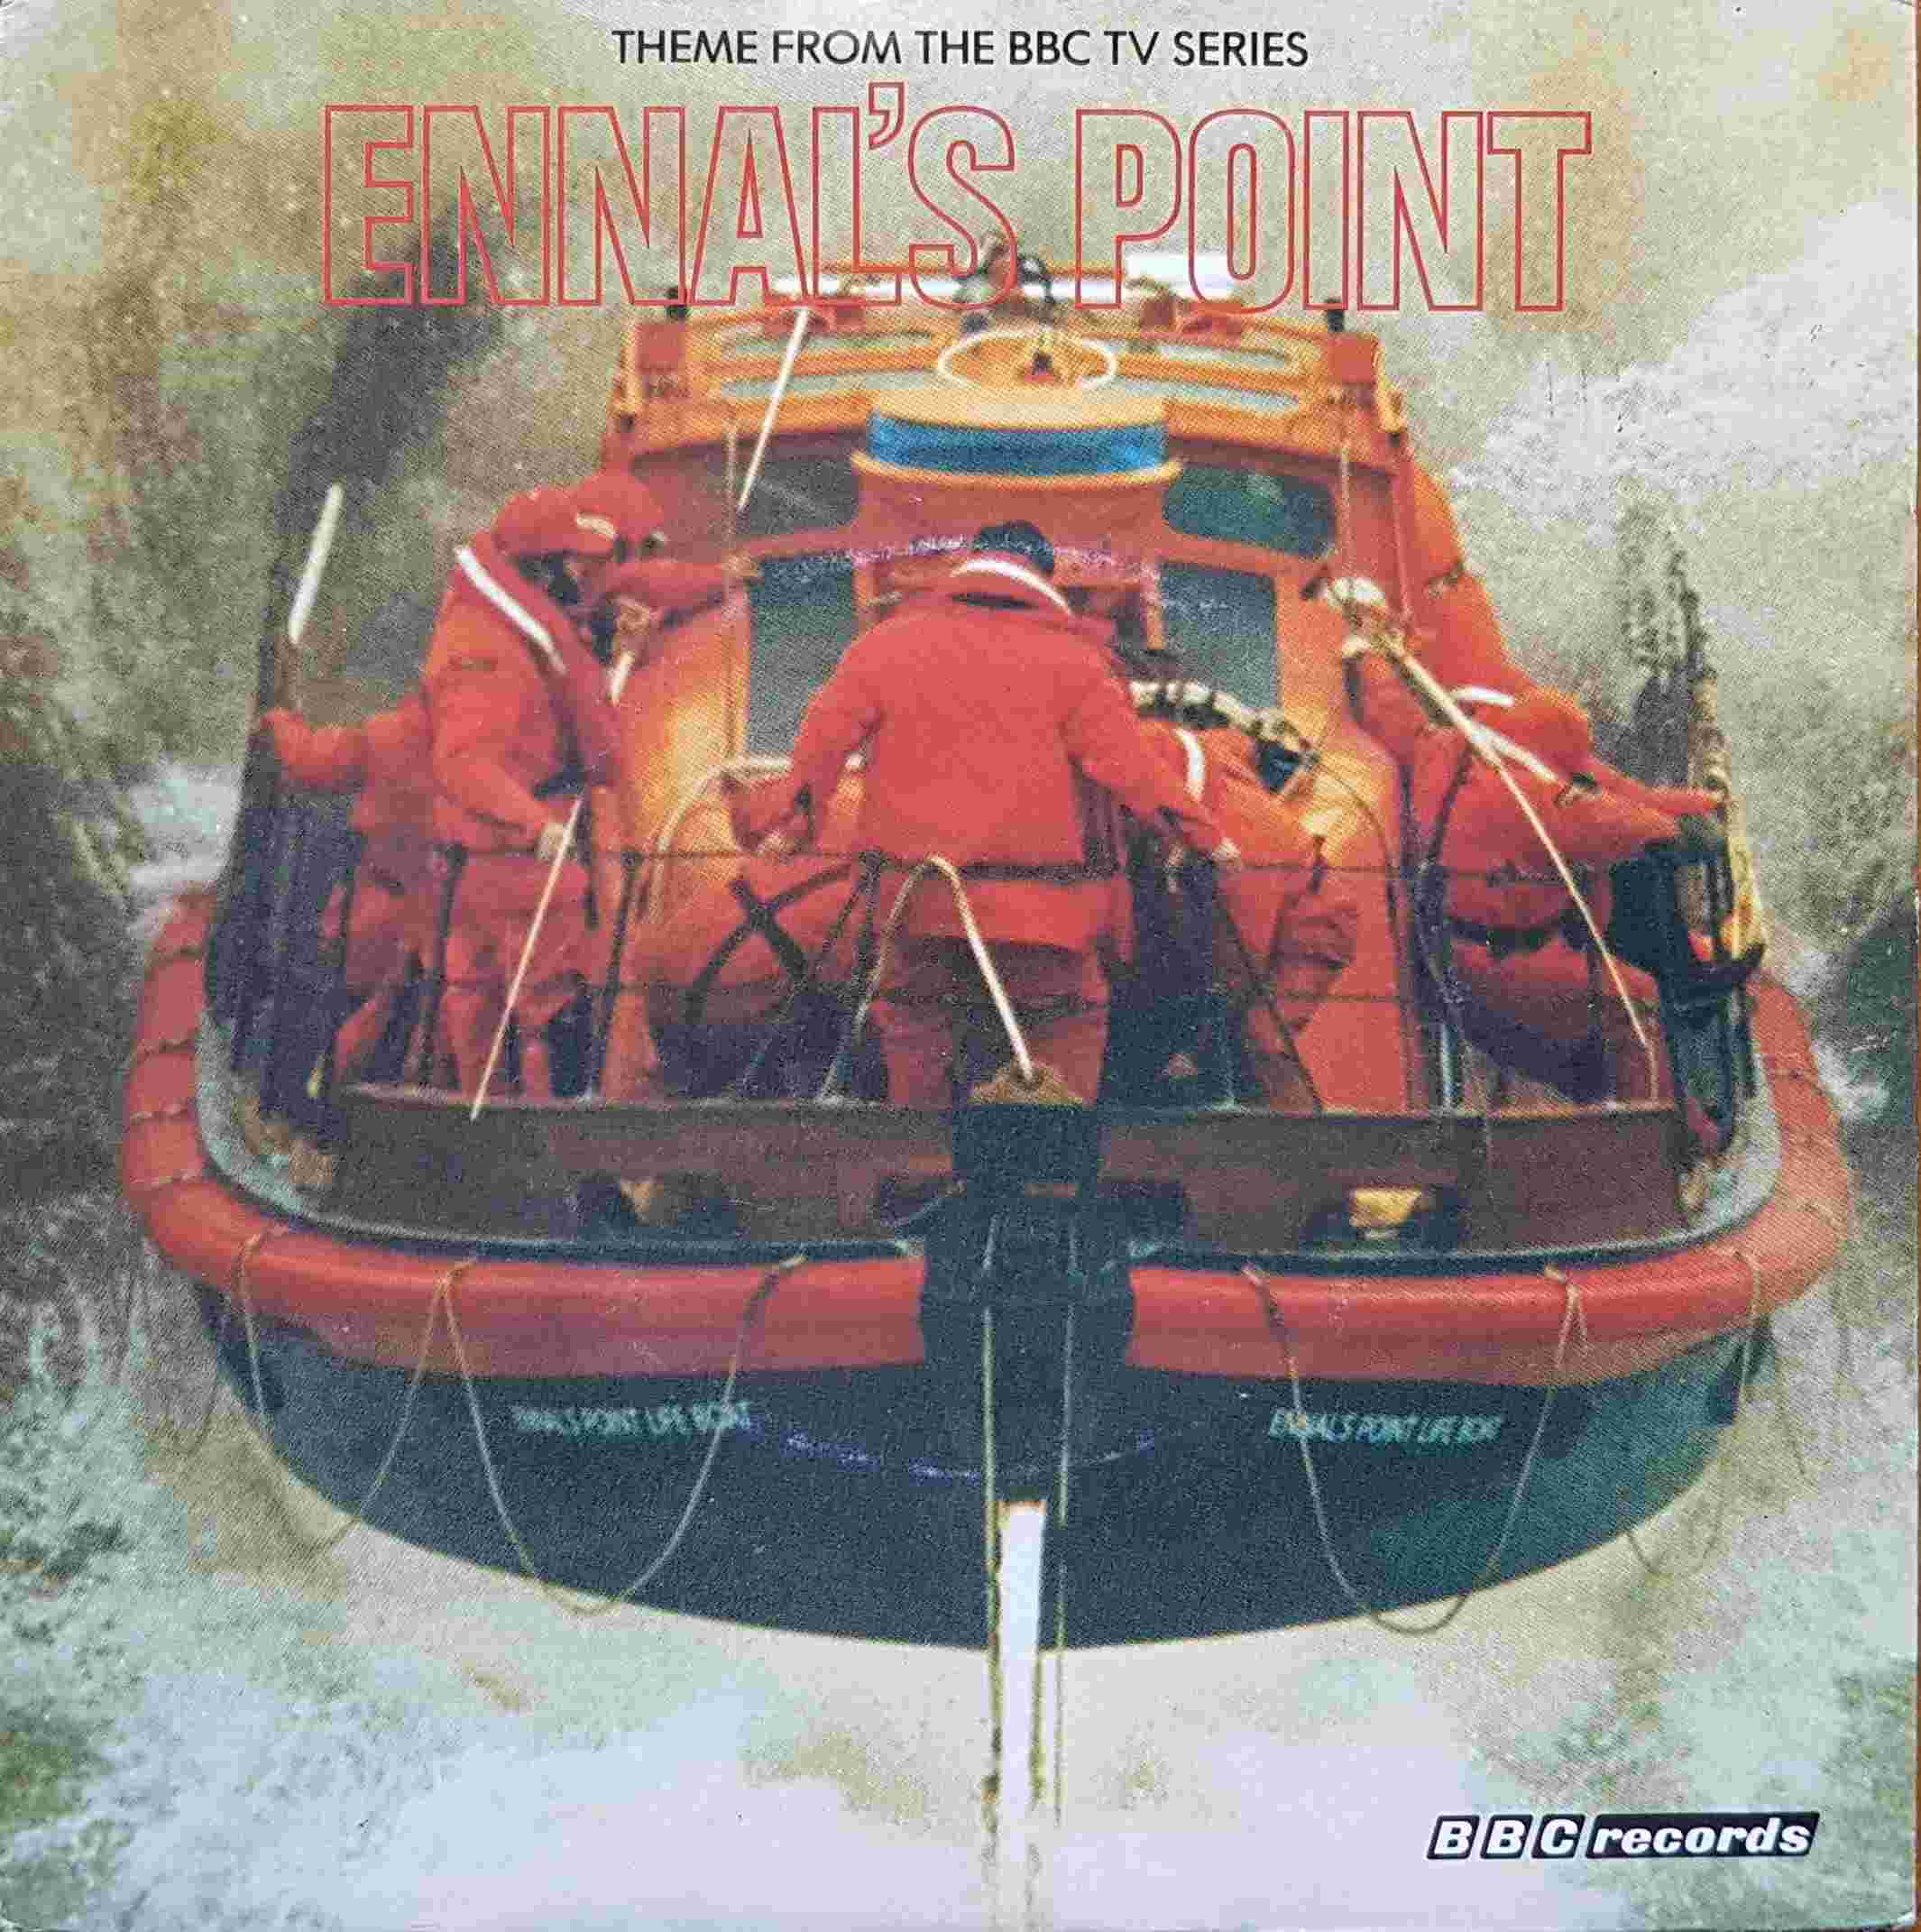 Picture of RESL 109 Ennal's point single by artist Hazel O'Connor / Mike Townsend from the BBC records and Tapes library